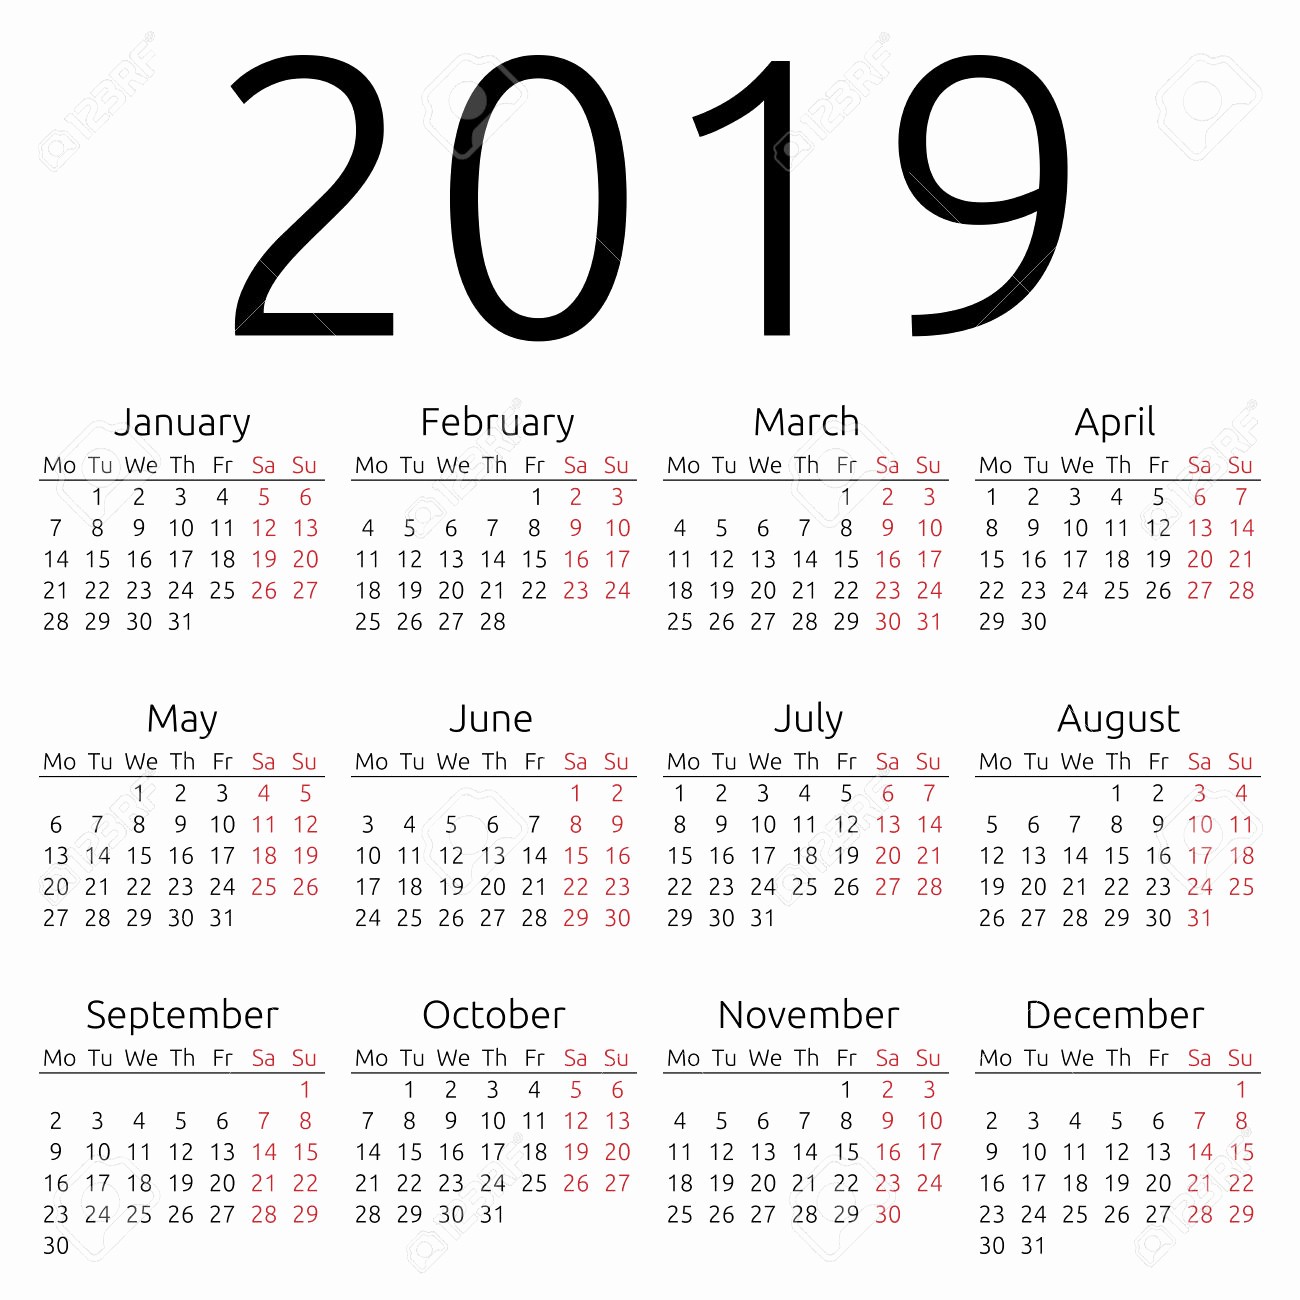 2019 Yearly Calendar with Holidays Awesome Yearly Calendar 2019